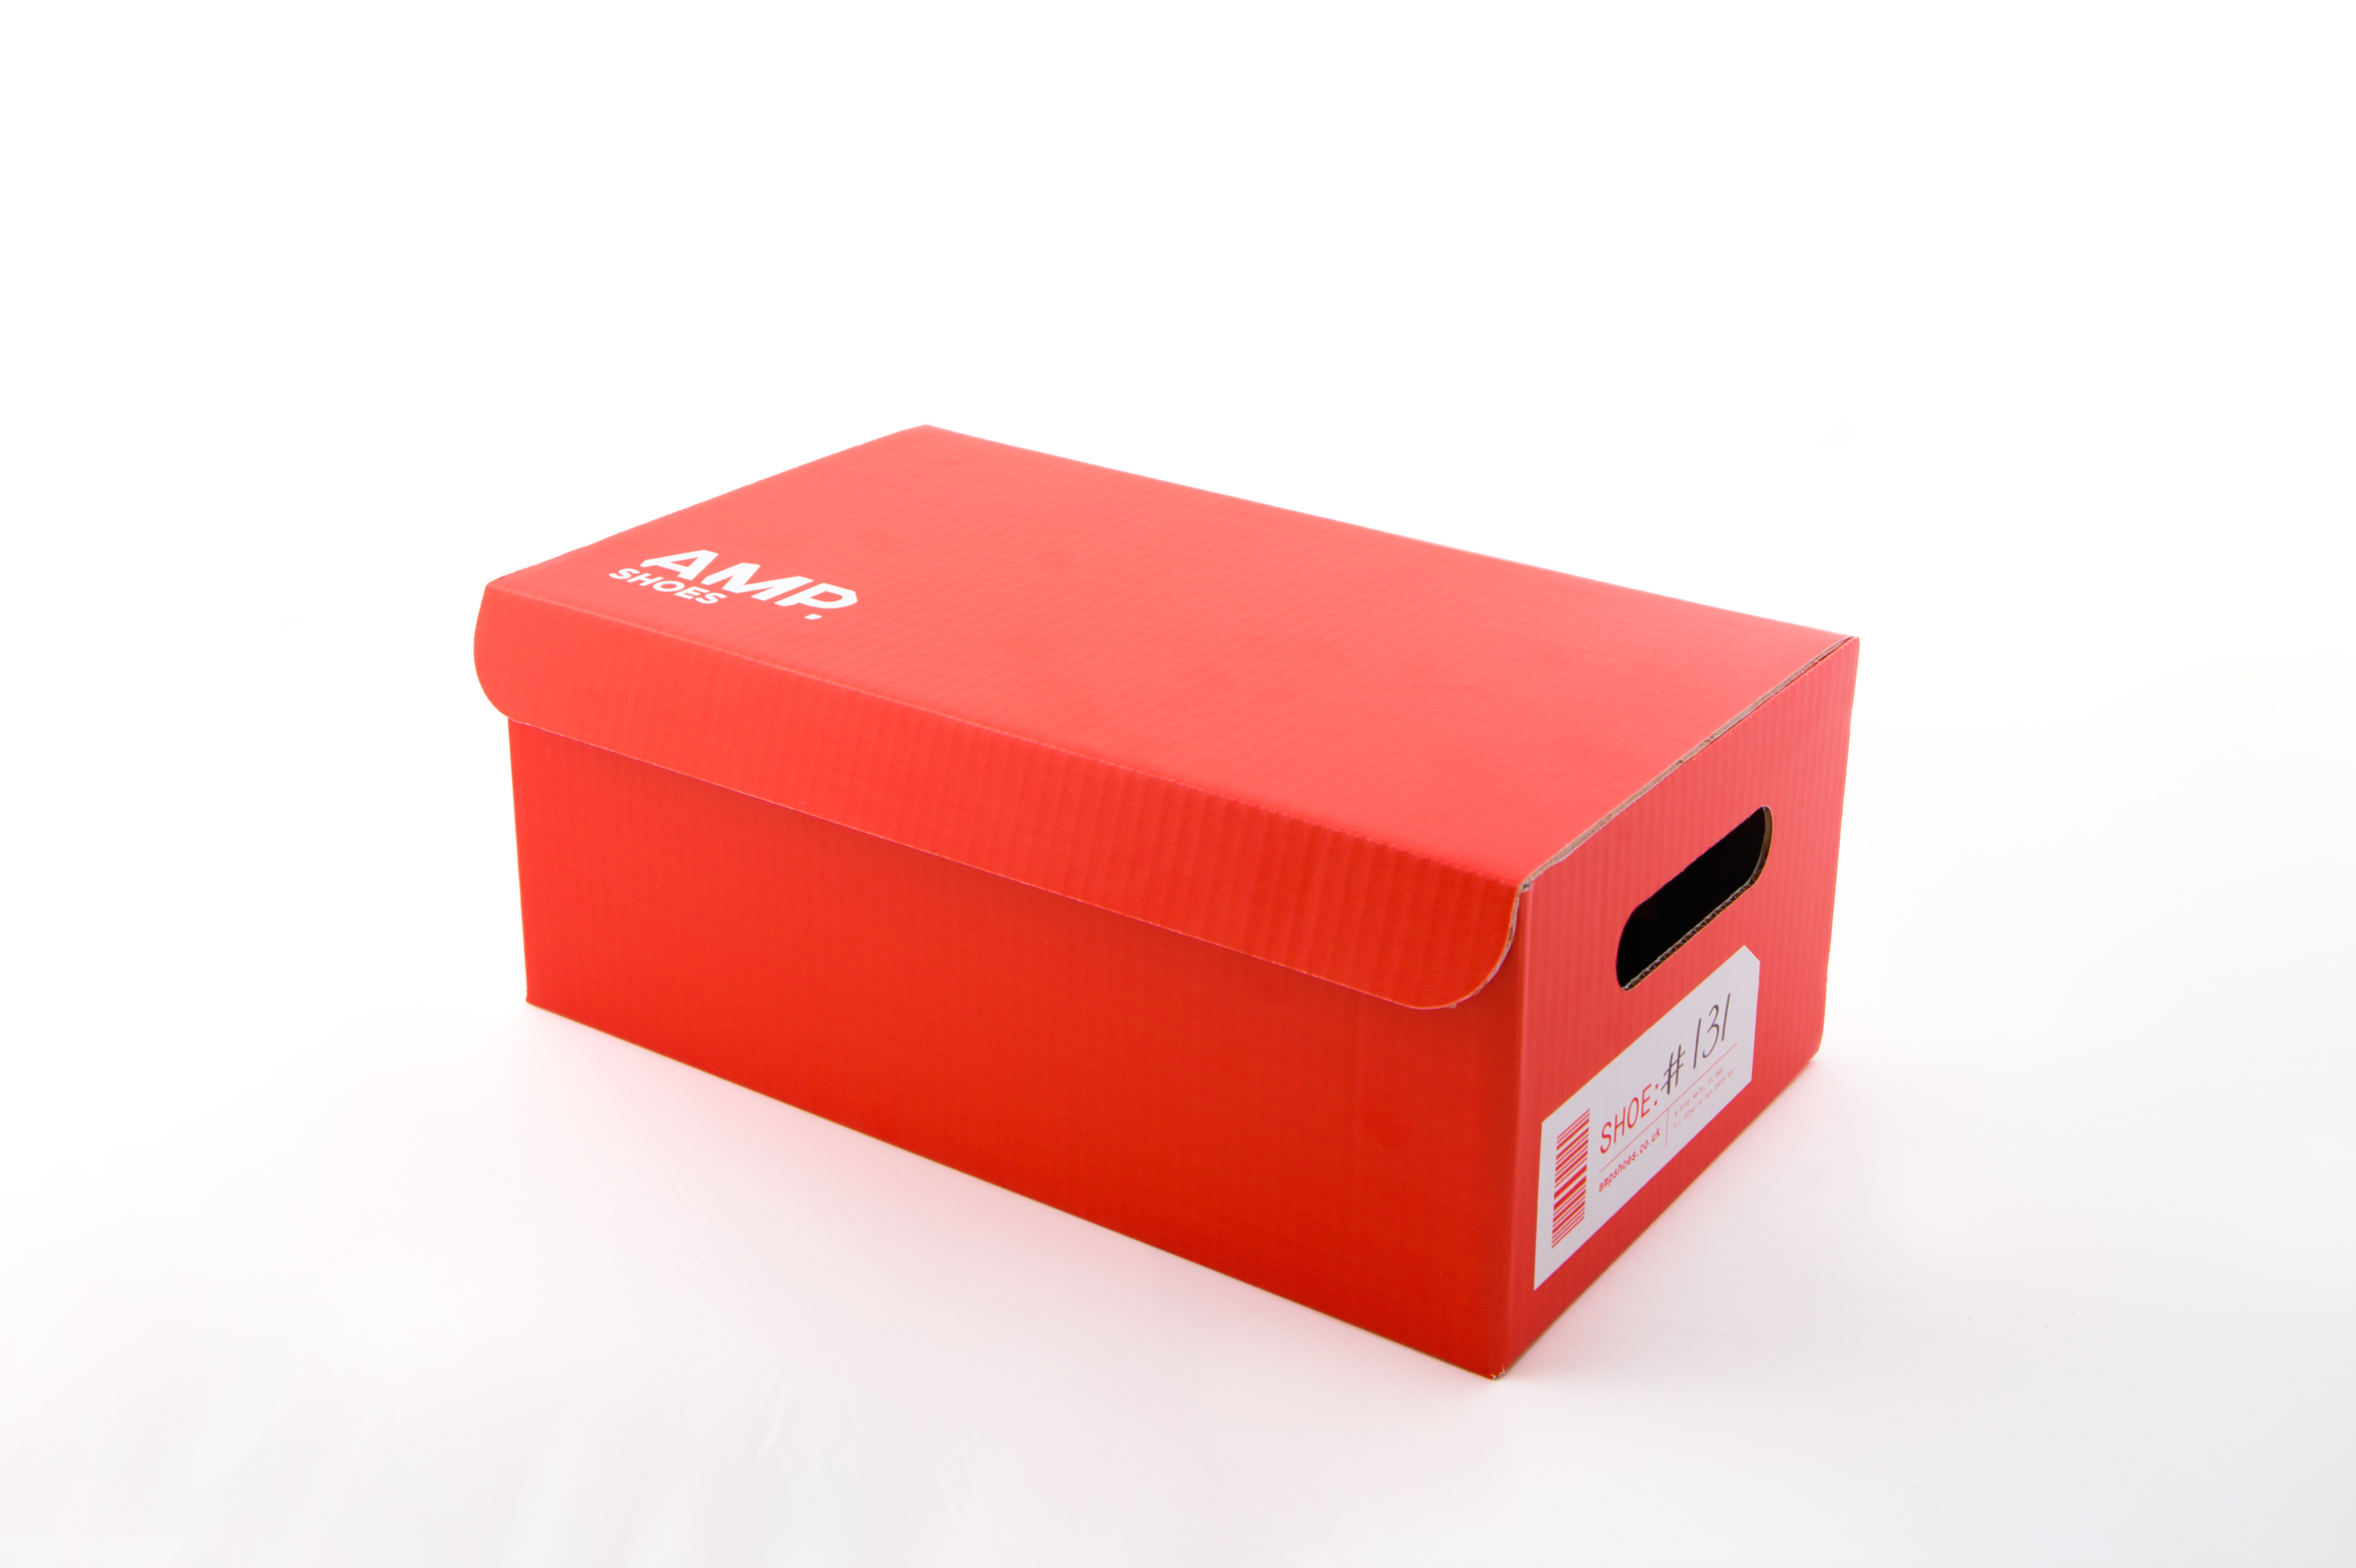  Direct mail came in the form of shoeboxes 